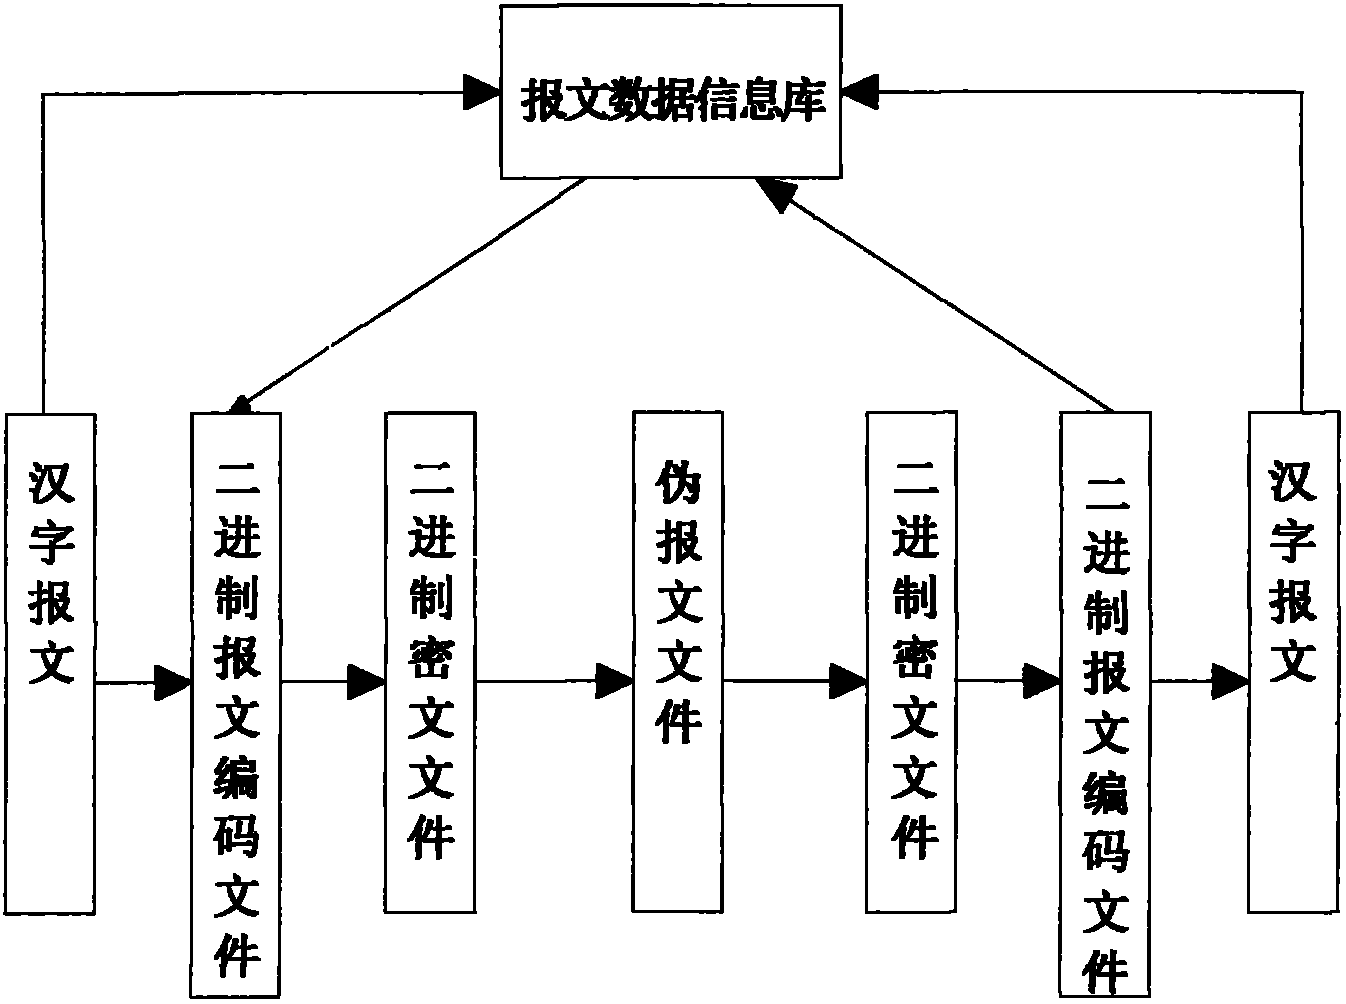 Compression method for Chinese character message data based on knapsack encryption